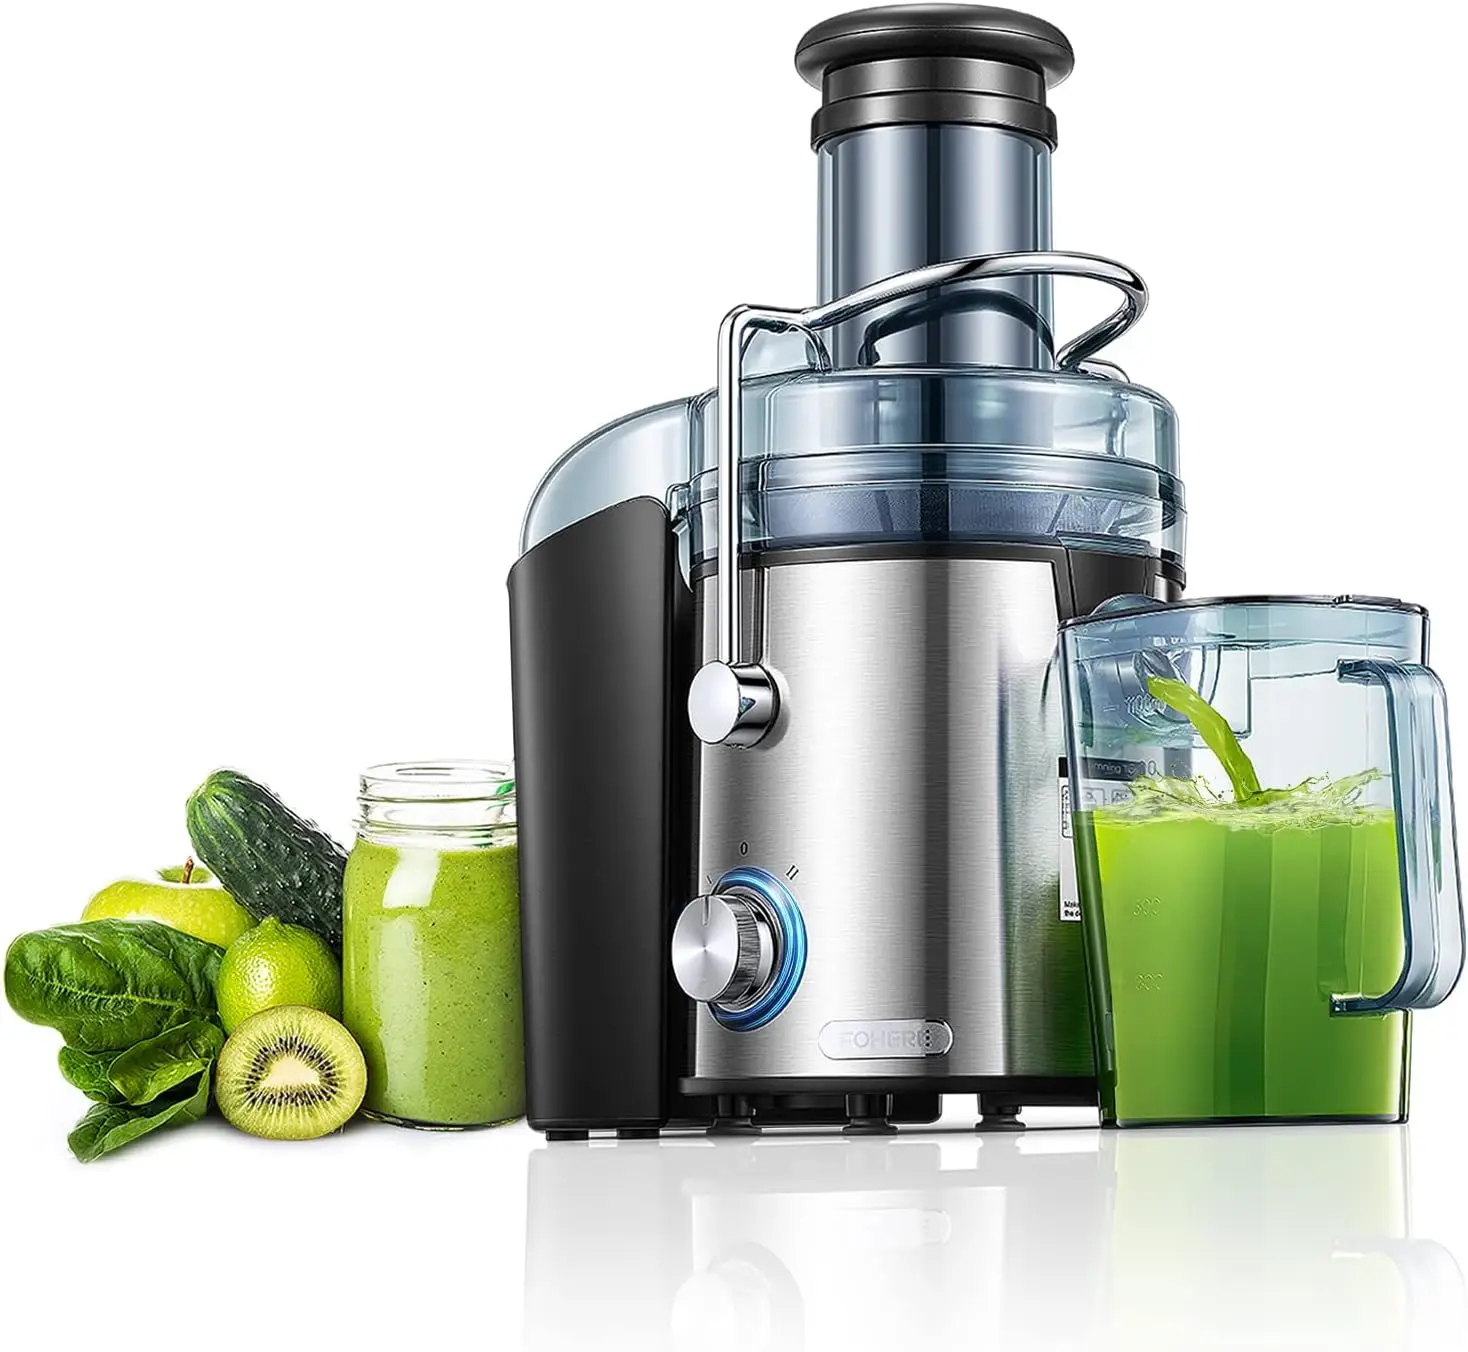 

Machines, FOHERE 1000W Juicer Whole Fruit and Vegetables, Quick Juicing Easy to Clean, 75MM Large Feed Chute, Dual Speed Setting